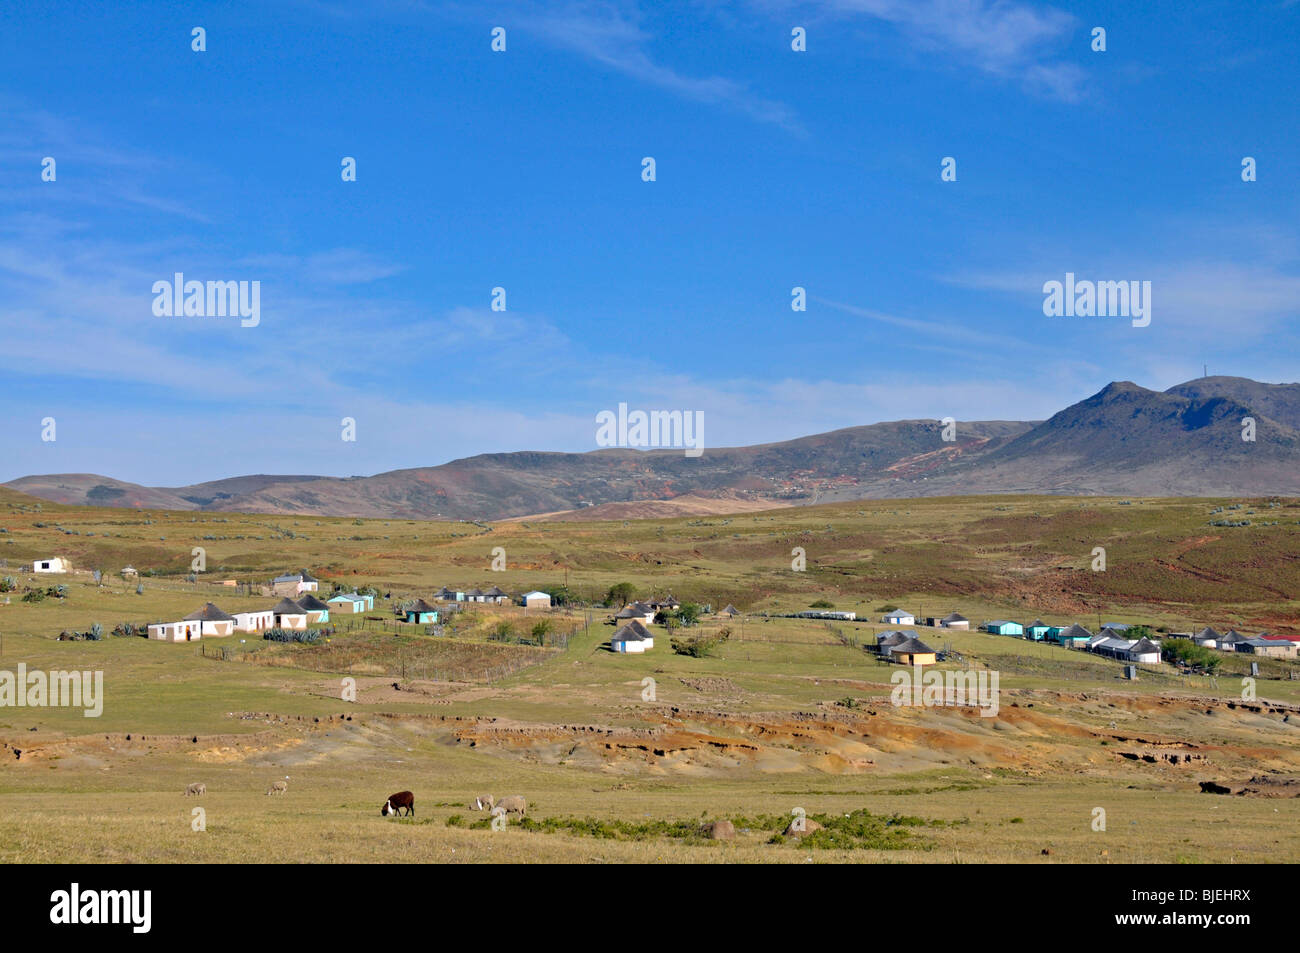 Huts in the Transkei area, Republic of South Africa Stock Photo